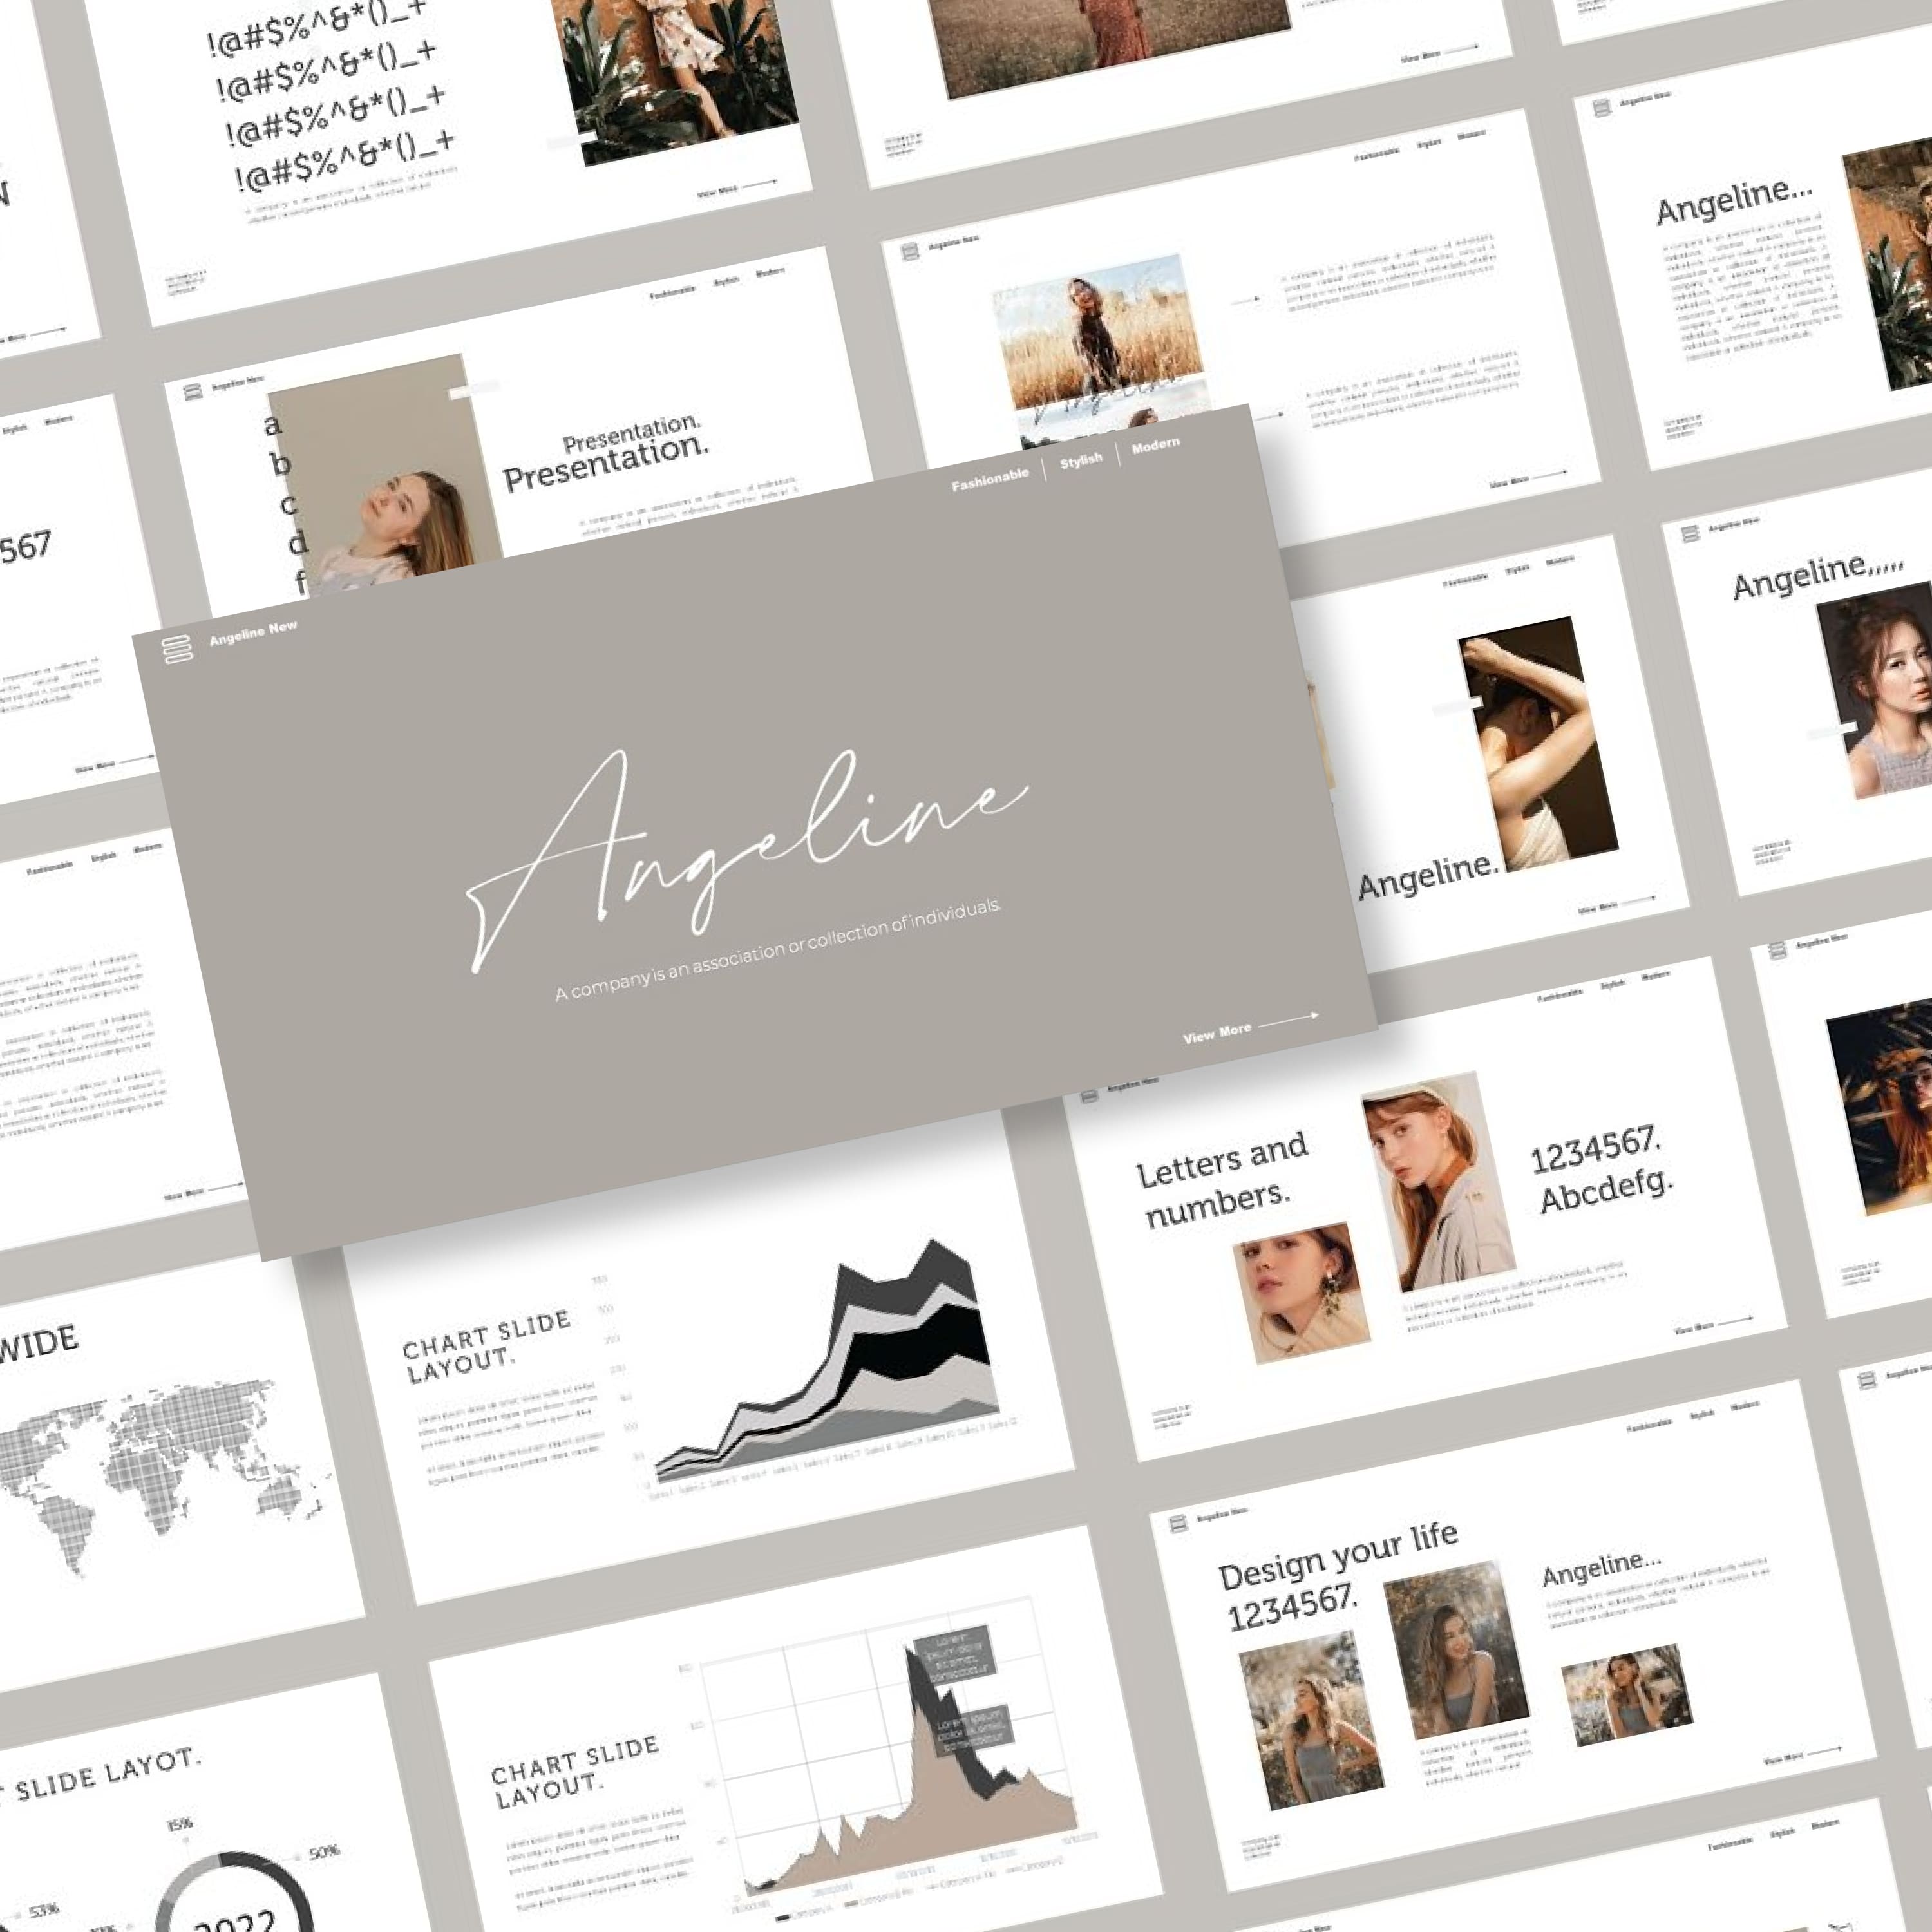 Angeline Keynote Template from Barland Design.